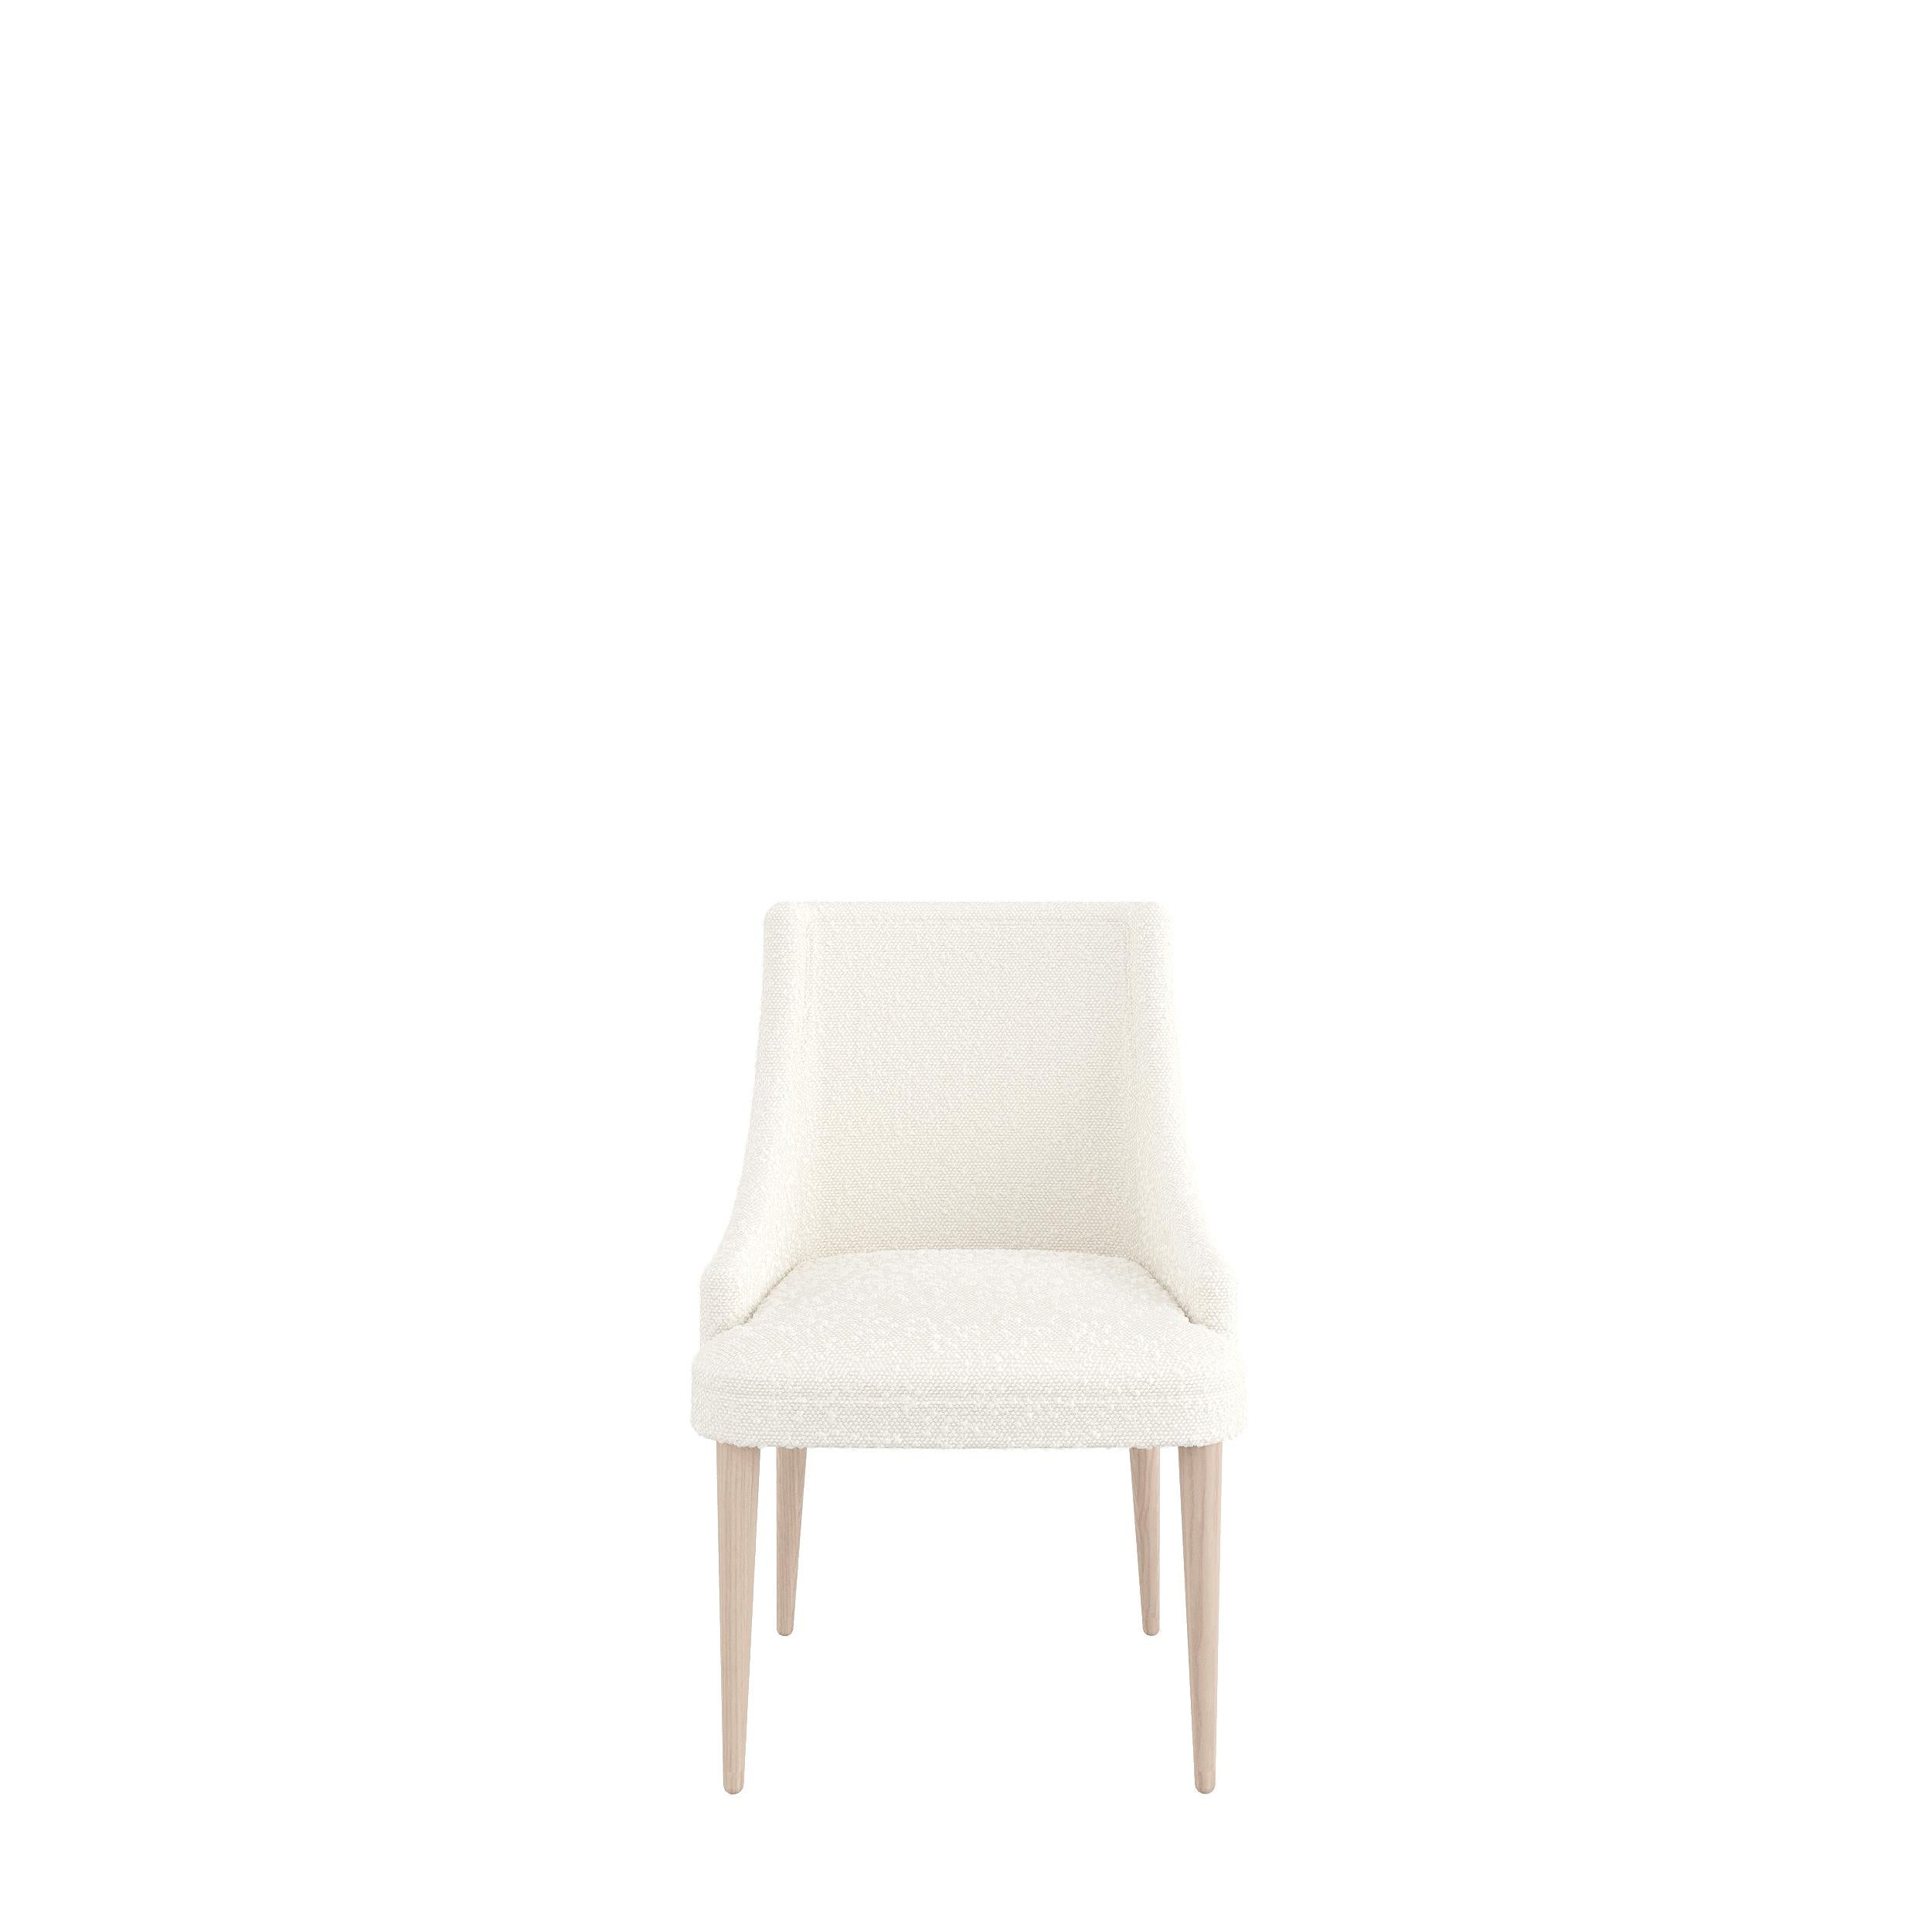 Elegant and timeless design, the CORDOBA  chair is very comfortable and engaging, suitable for contemporary spaces.
Cordoba is available to order in fabric, eco-leather, natural leathers or COM. The legs can be in wood, lacquered or covered in